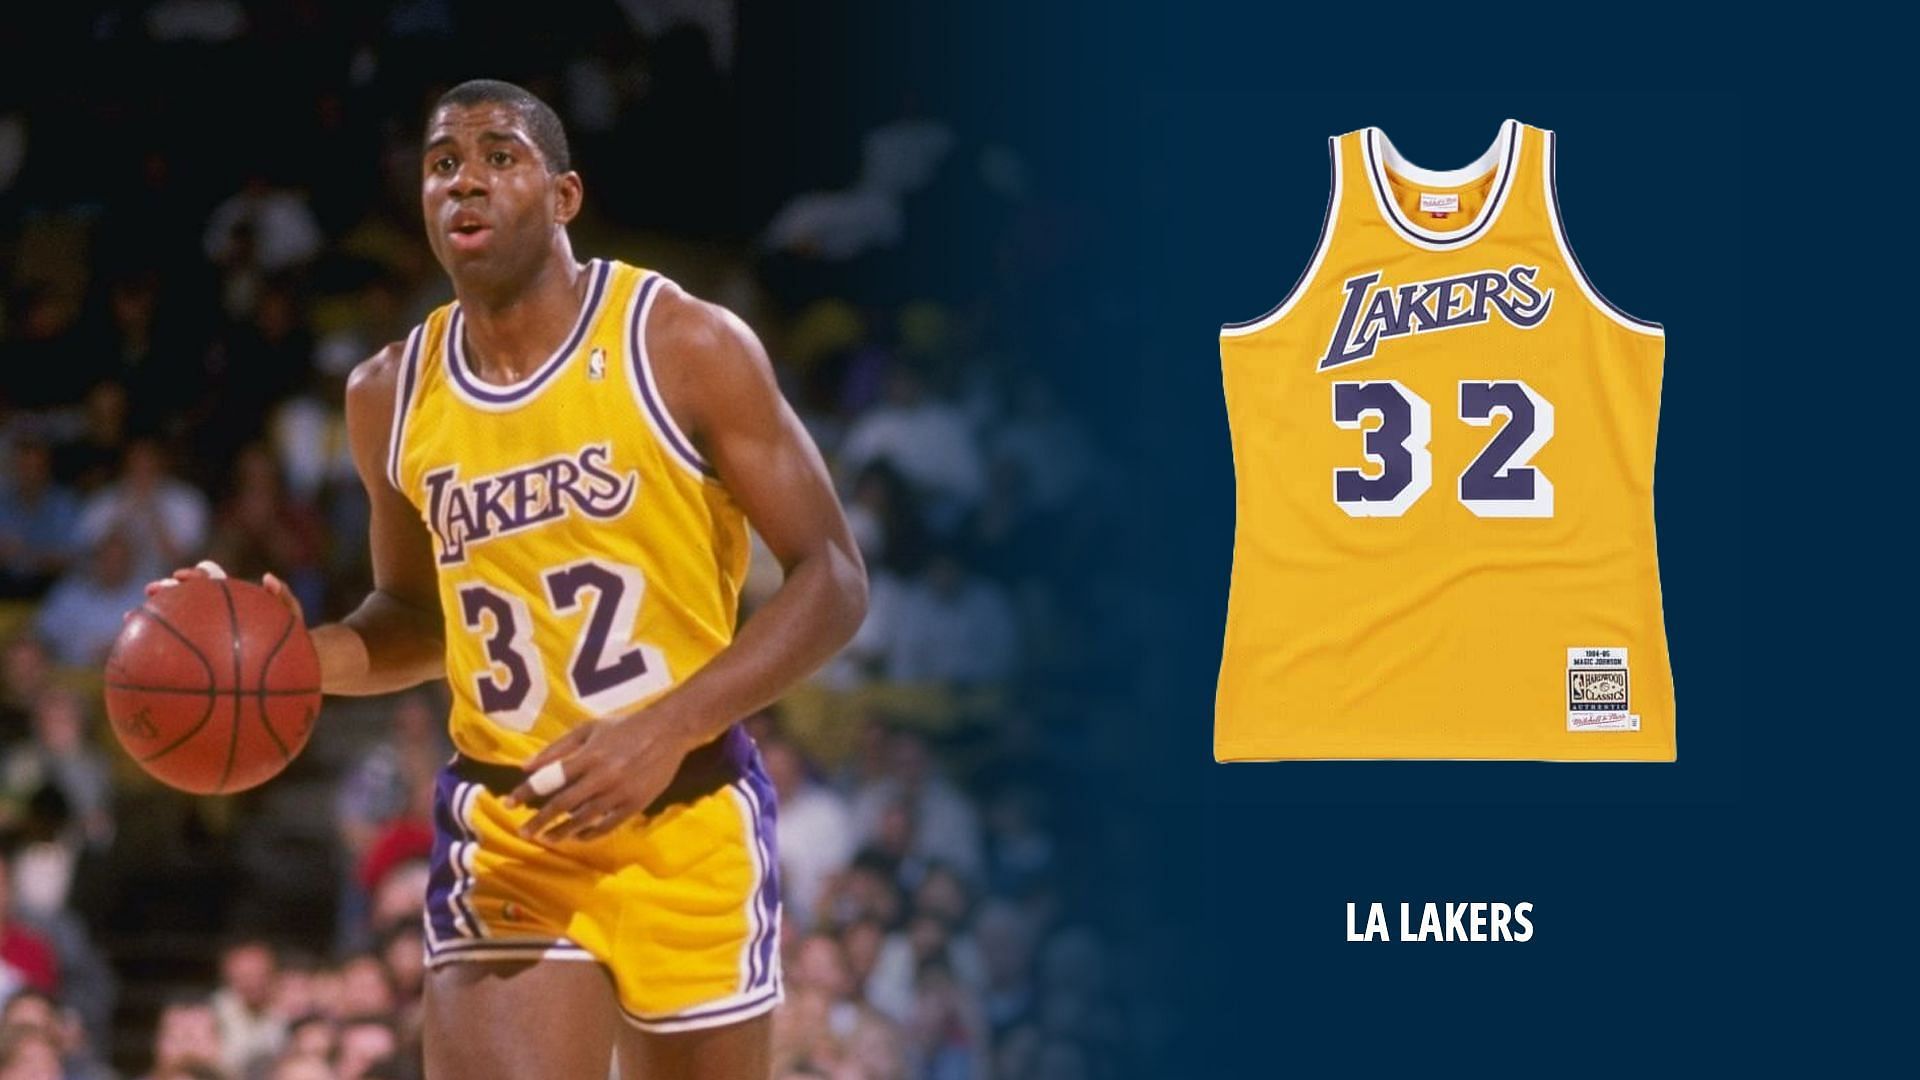 The Lakers also have iconic NBA jerseys that have been used for a long time